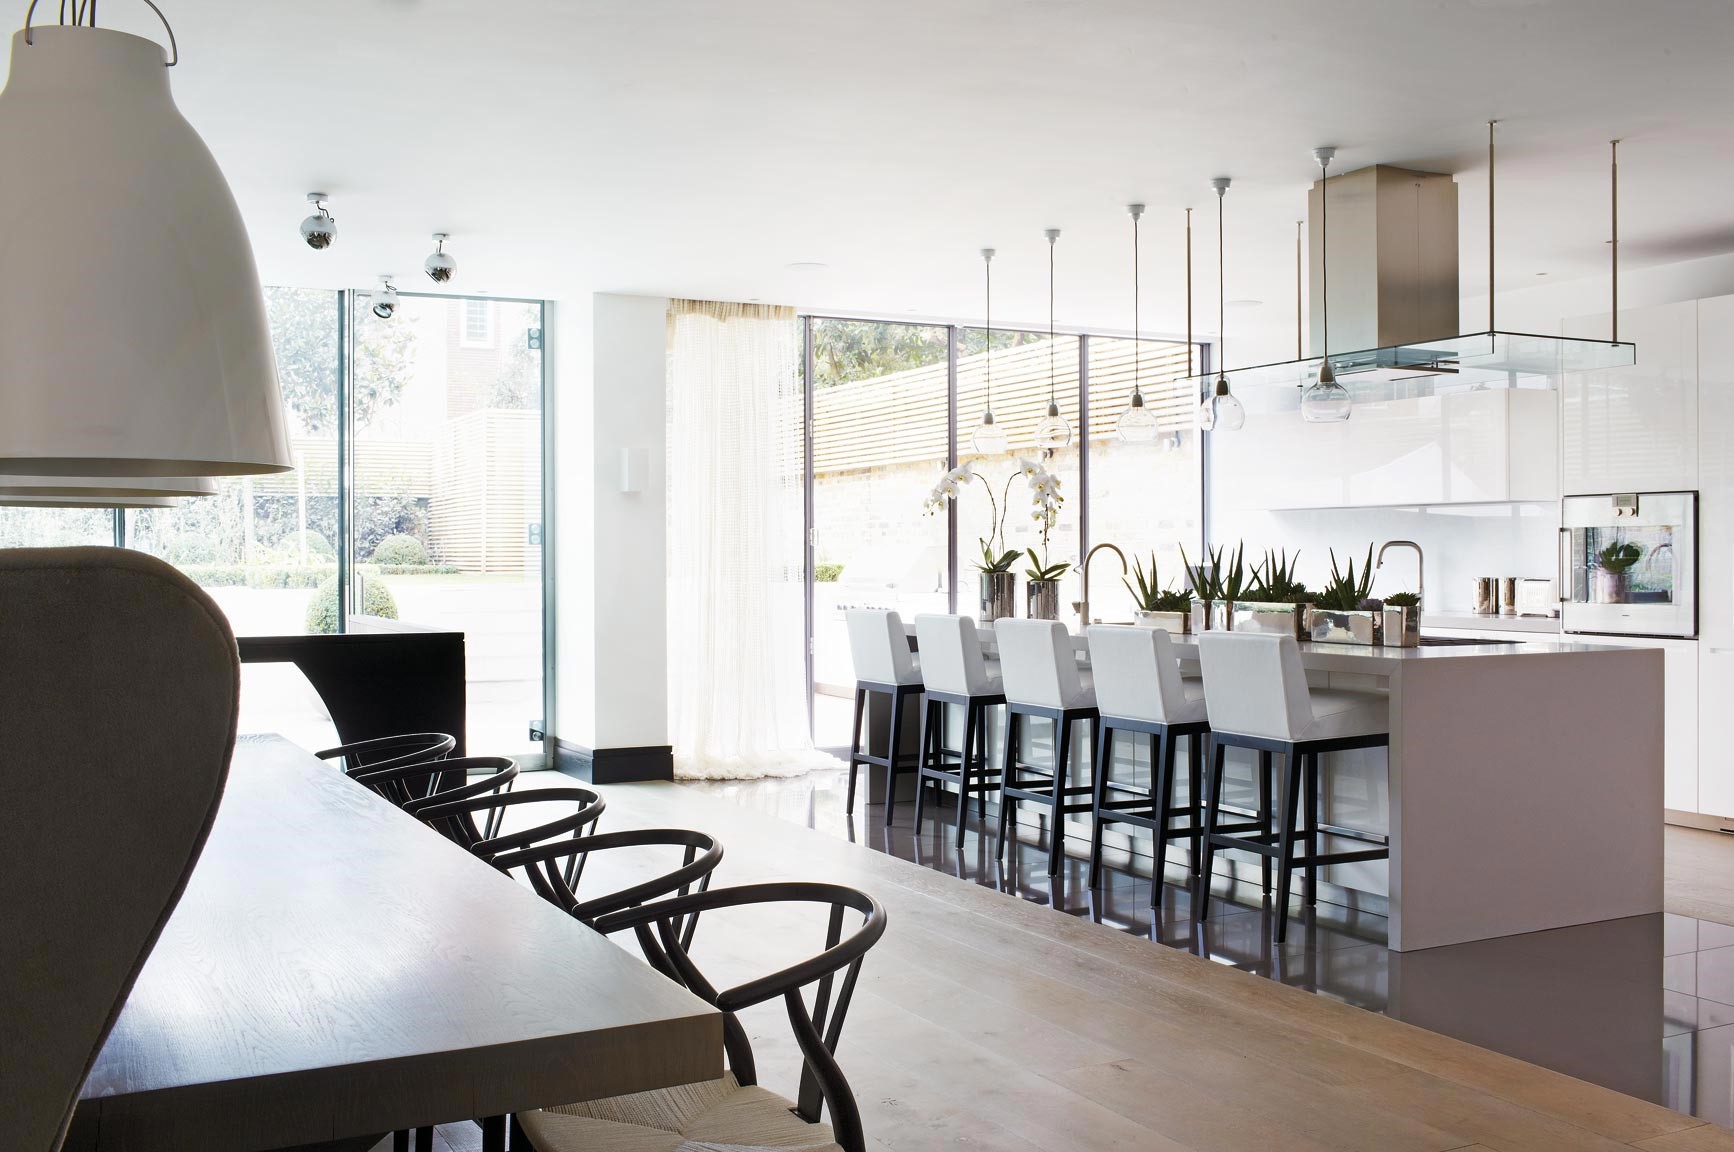 6 Dining Room Ideas To Steal From Kelly Hoppen's Amazing Interiors  home inspiration ideas